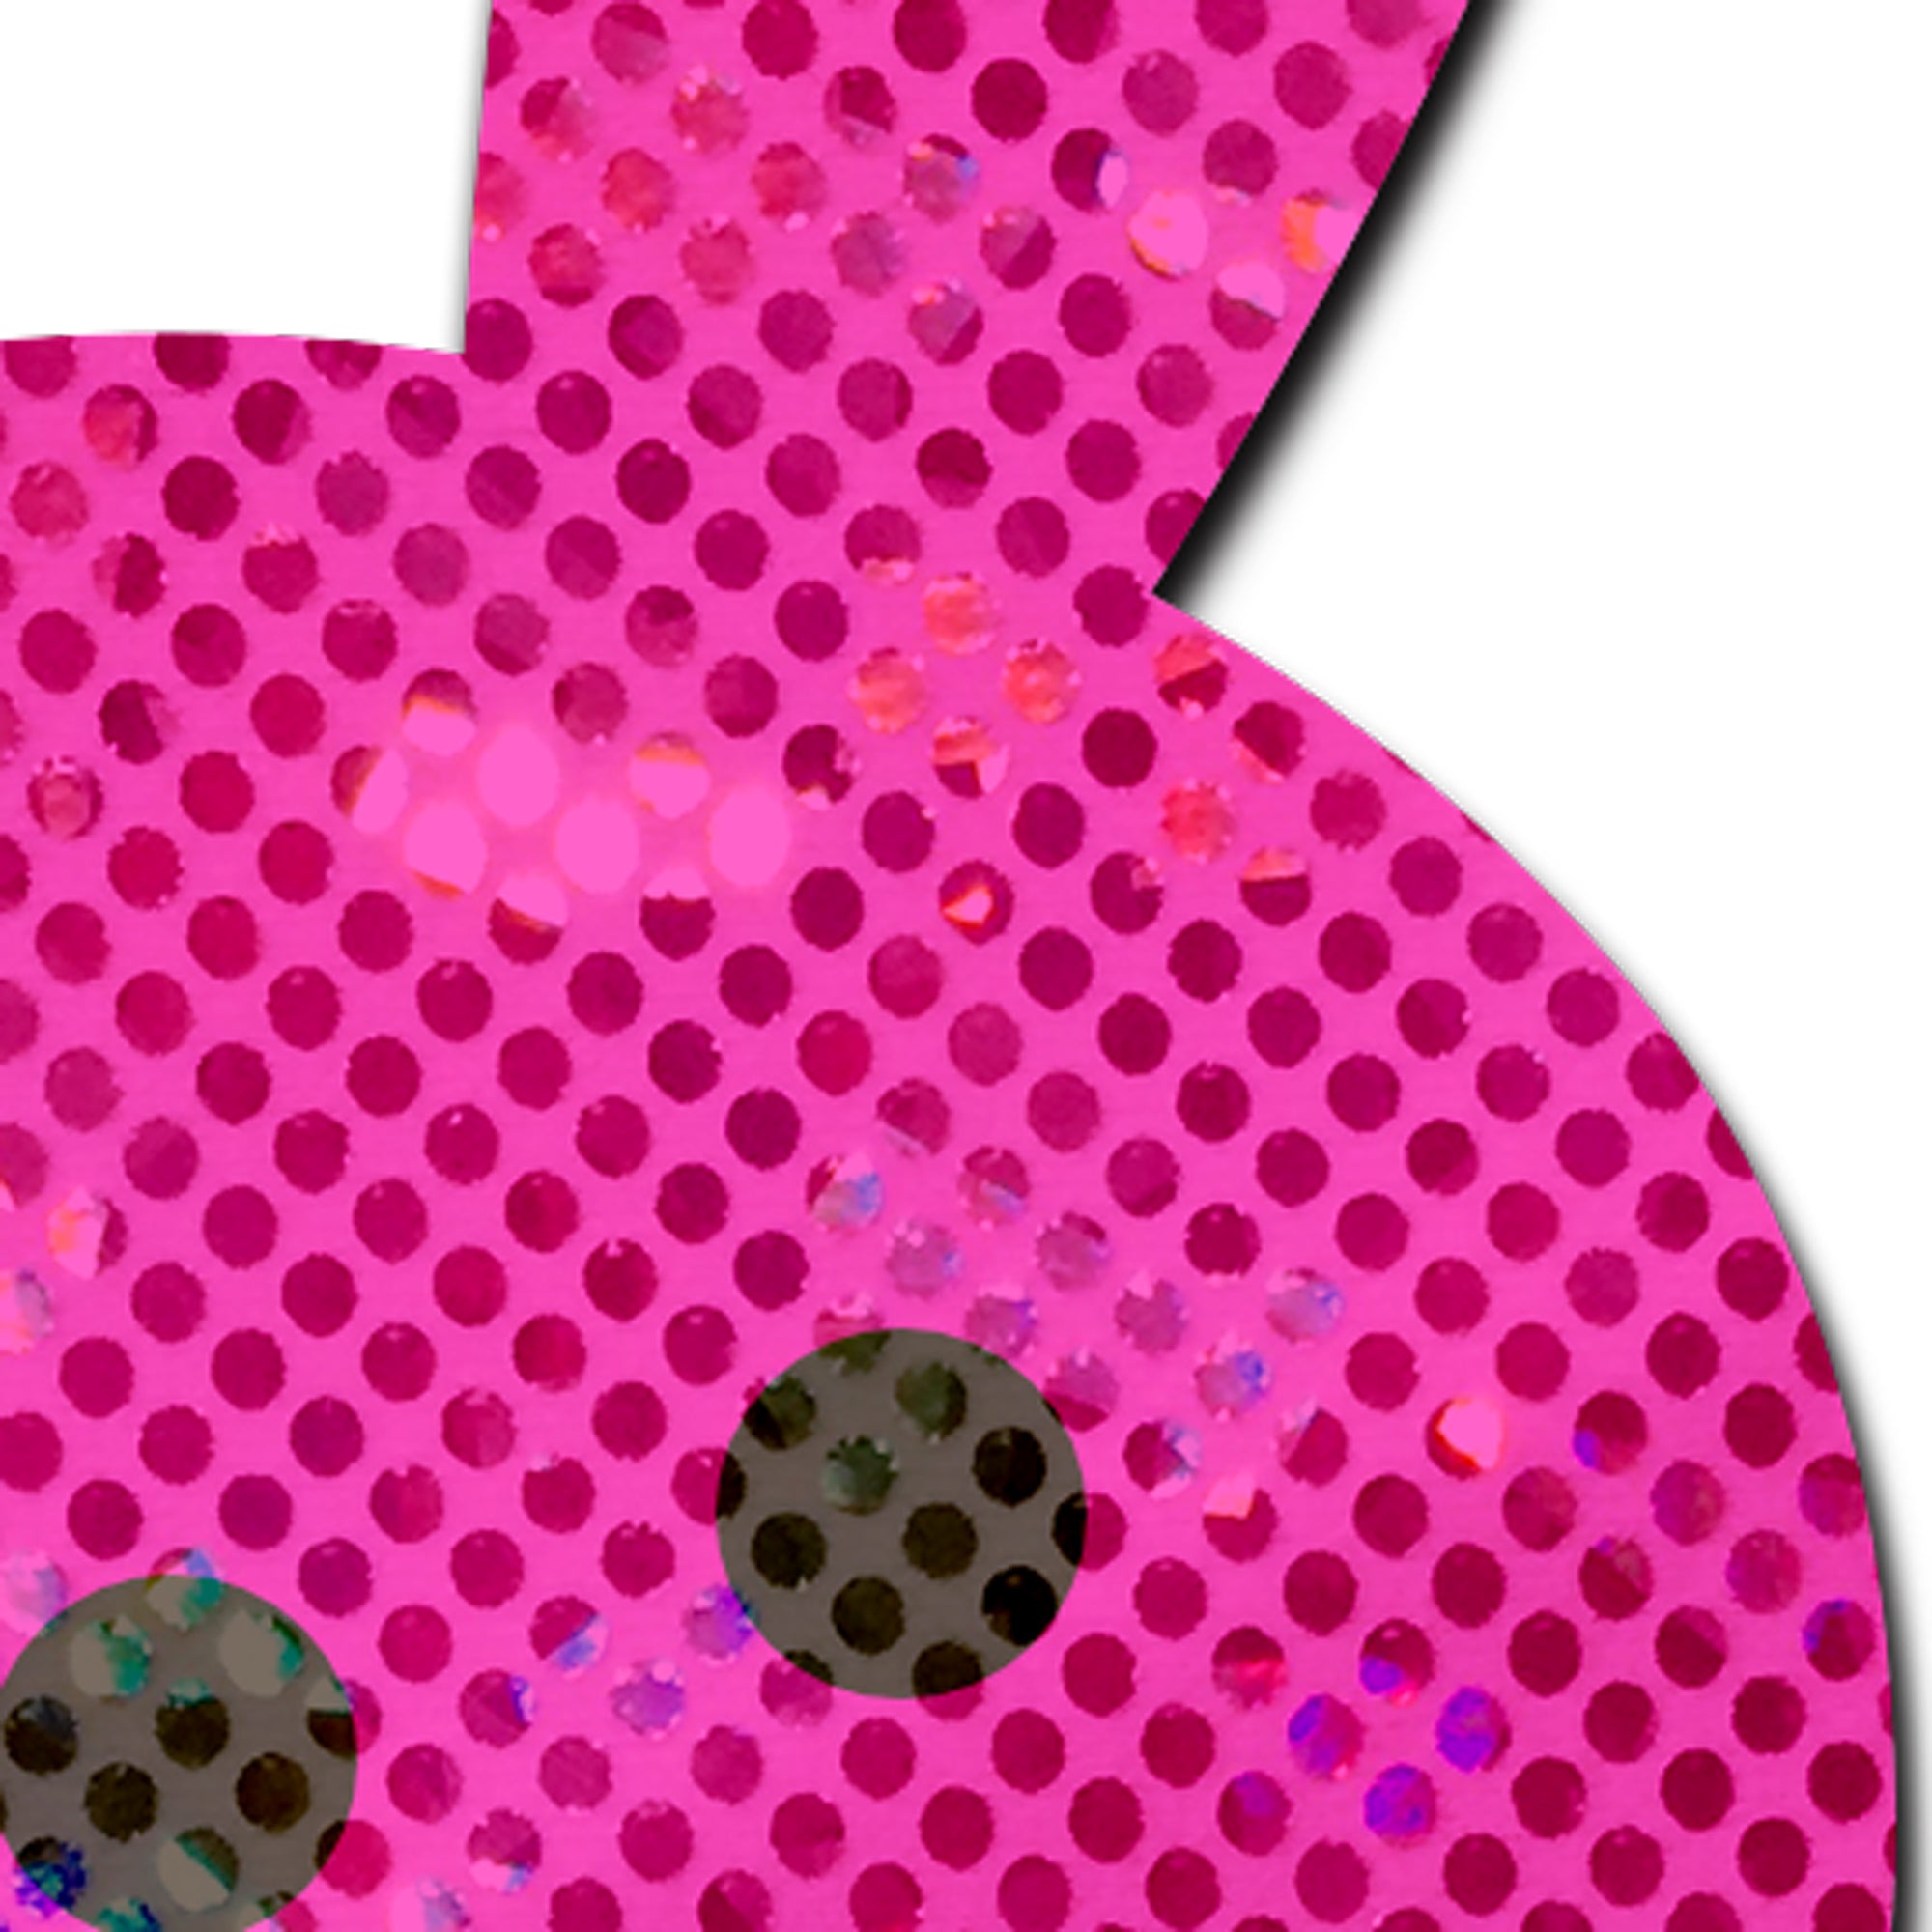 5 Pack: Bunny: Glittery Pink Marshmallow Easter Rabbit Nipple Pasties by Pastease® o/s